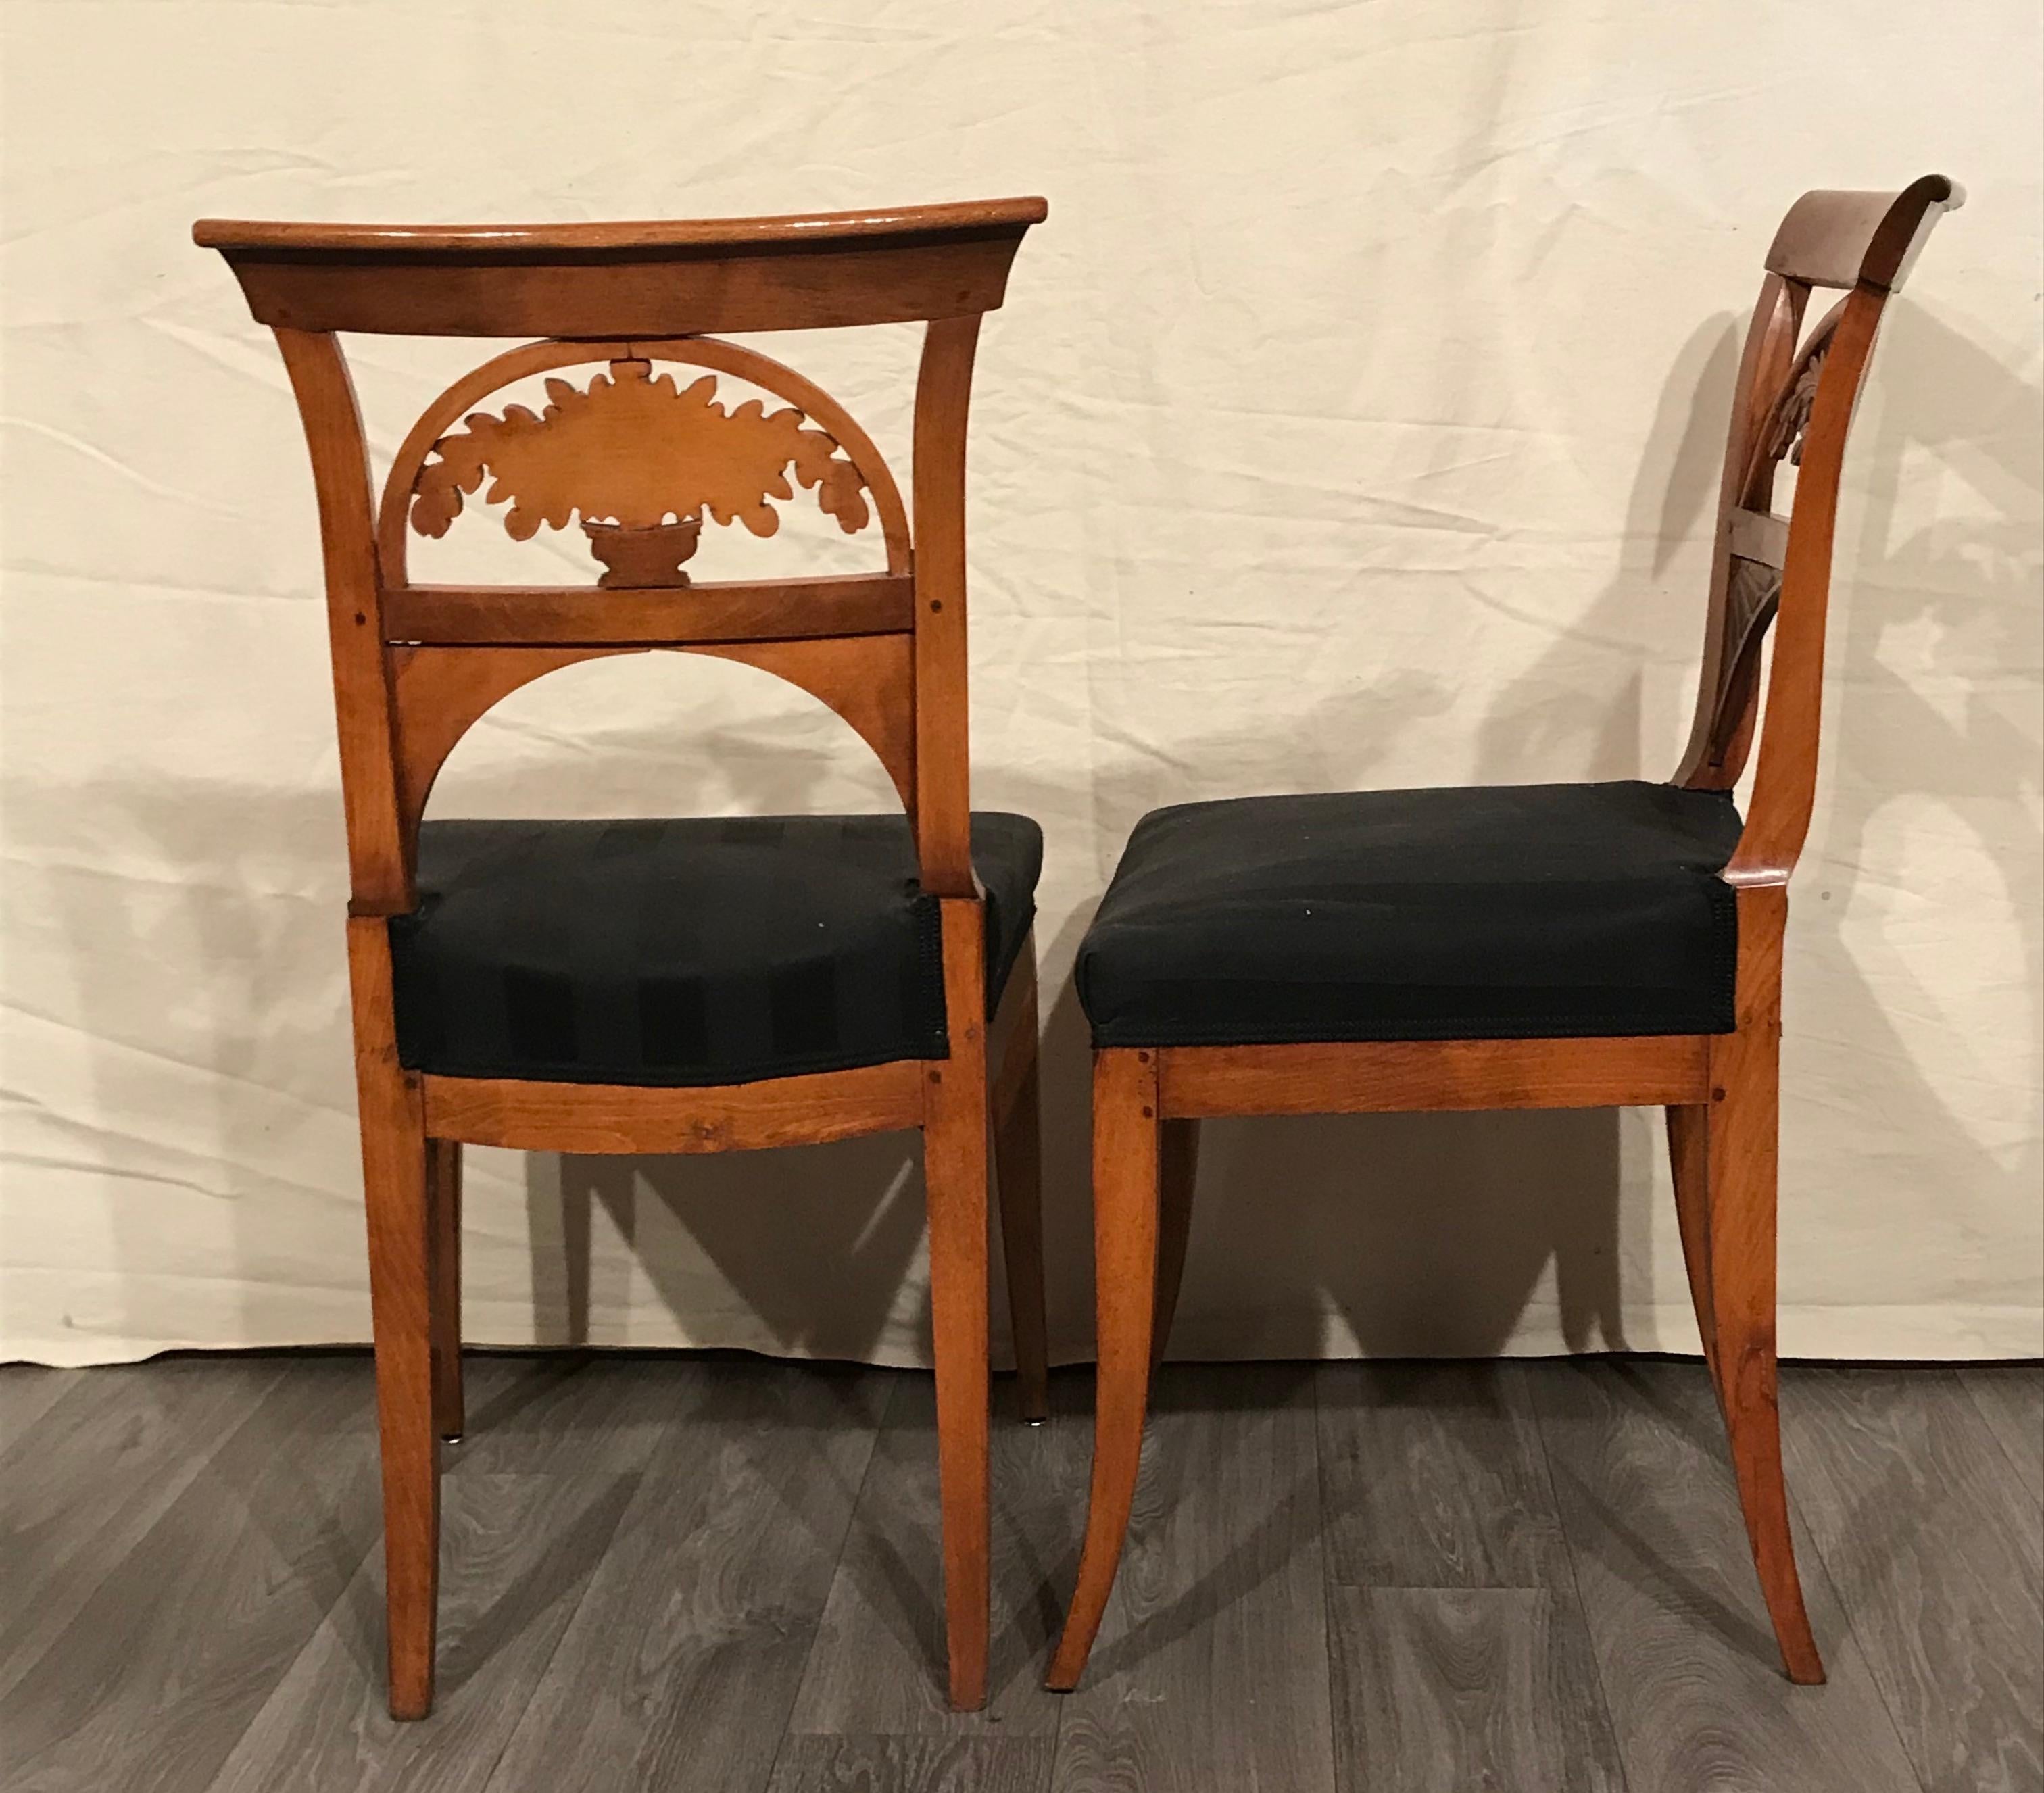 This pair of Neoclassical chairs has very special backrests. The openwork decorations feature naturalistically hand carved oak branches. 
The chairs are in very good condition. The wood has been refinished, the upholstery is in good condition. 
The